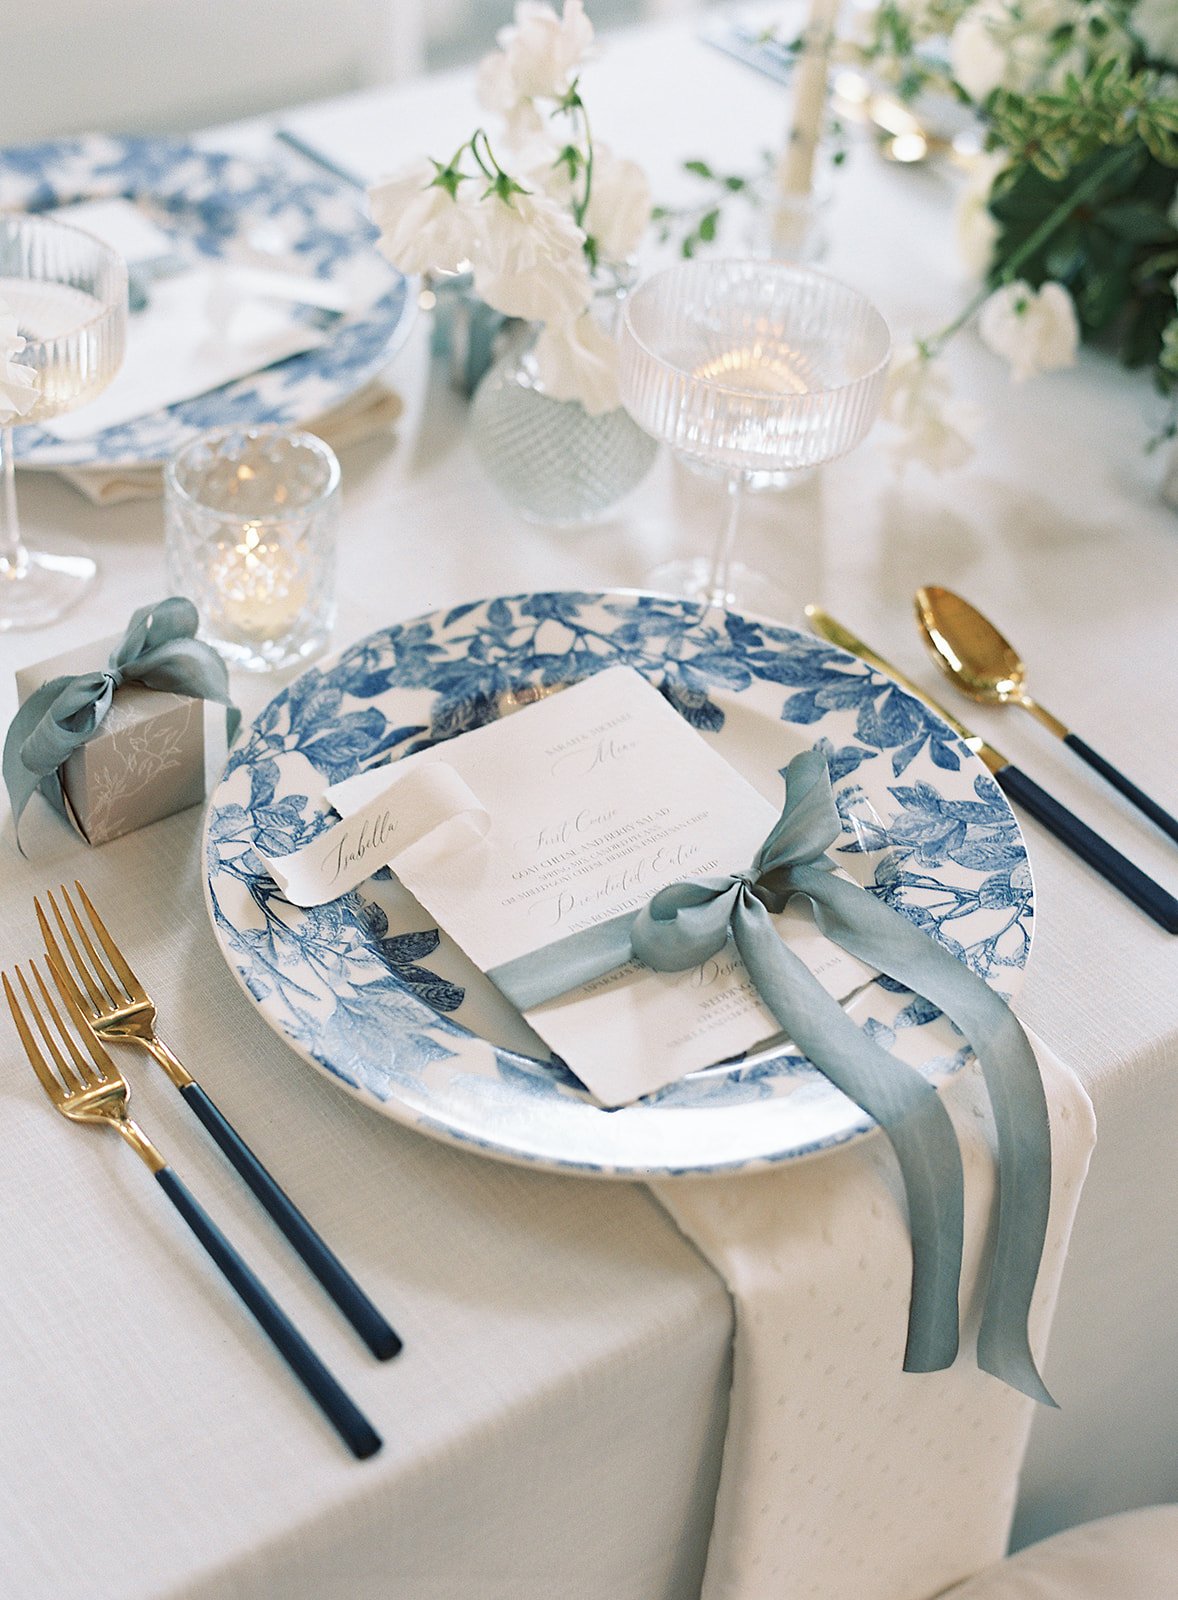 blue-and-white-floral-china-plate-event-table-rental-chicago.jpeg